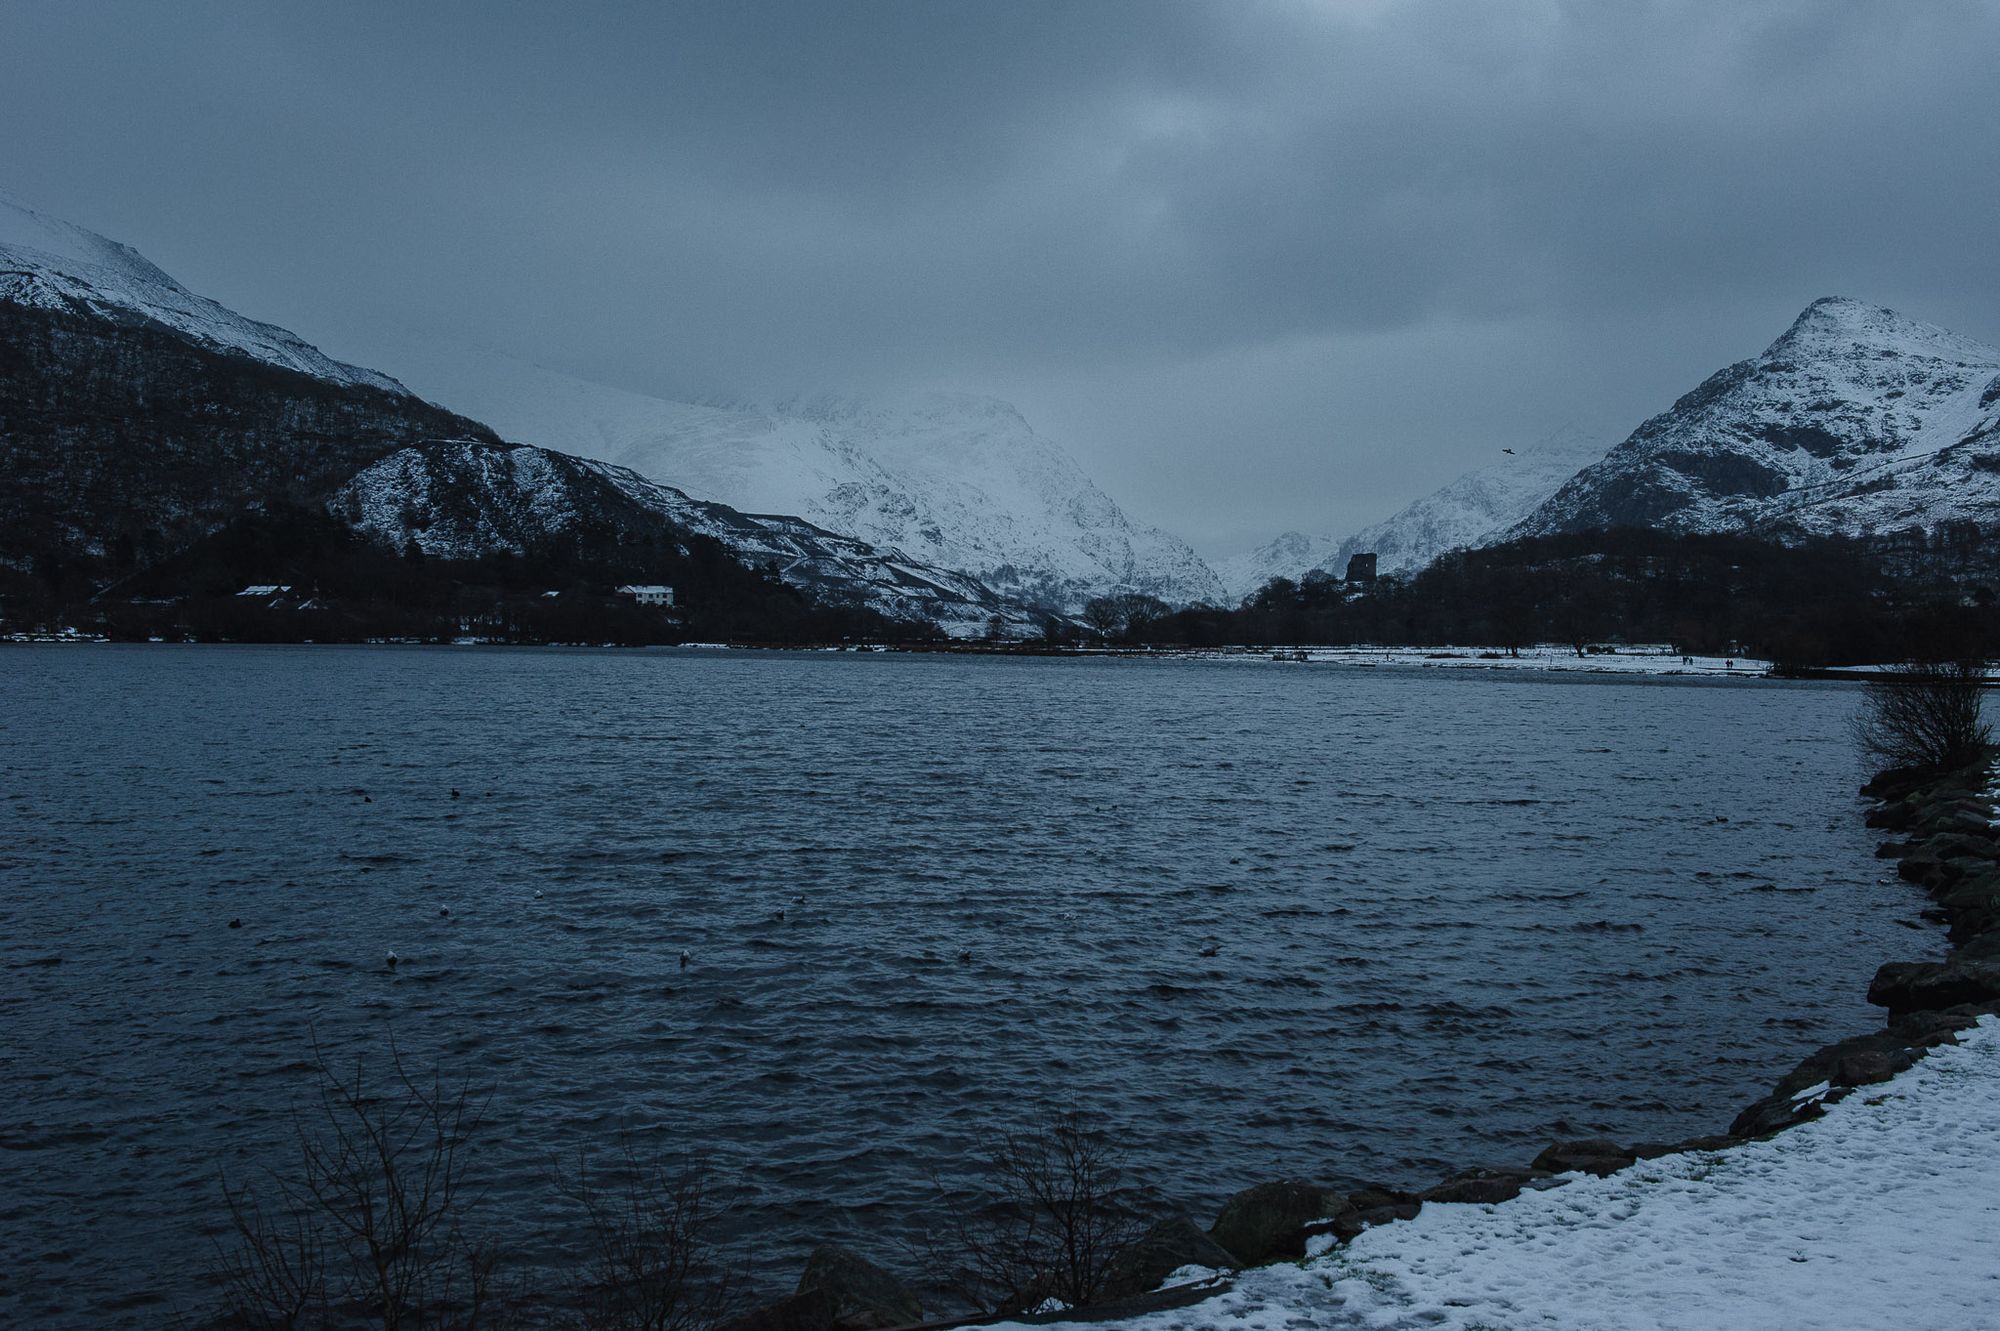 Dusk light falls over Lake Pardarn with Snowdonian mountains behind.